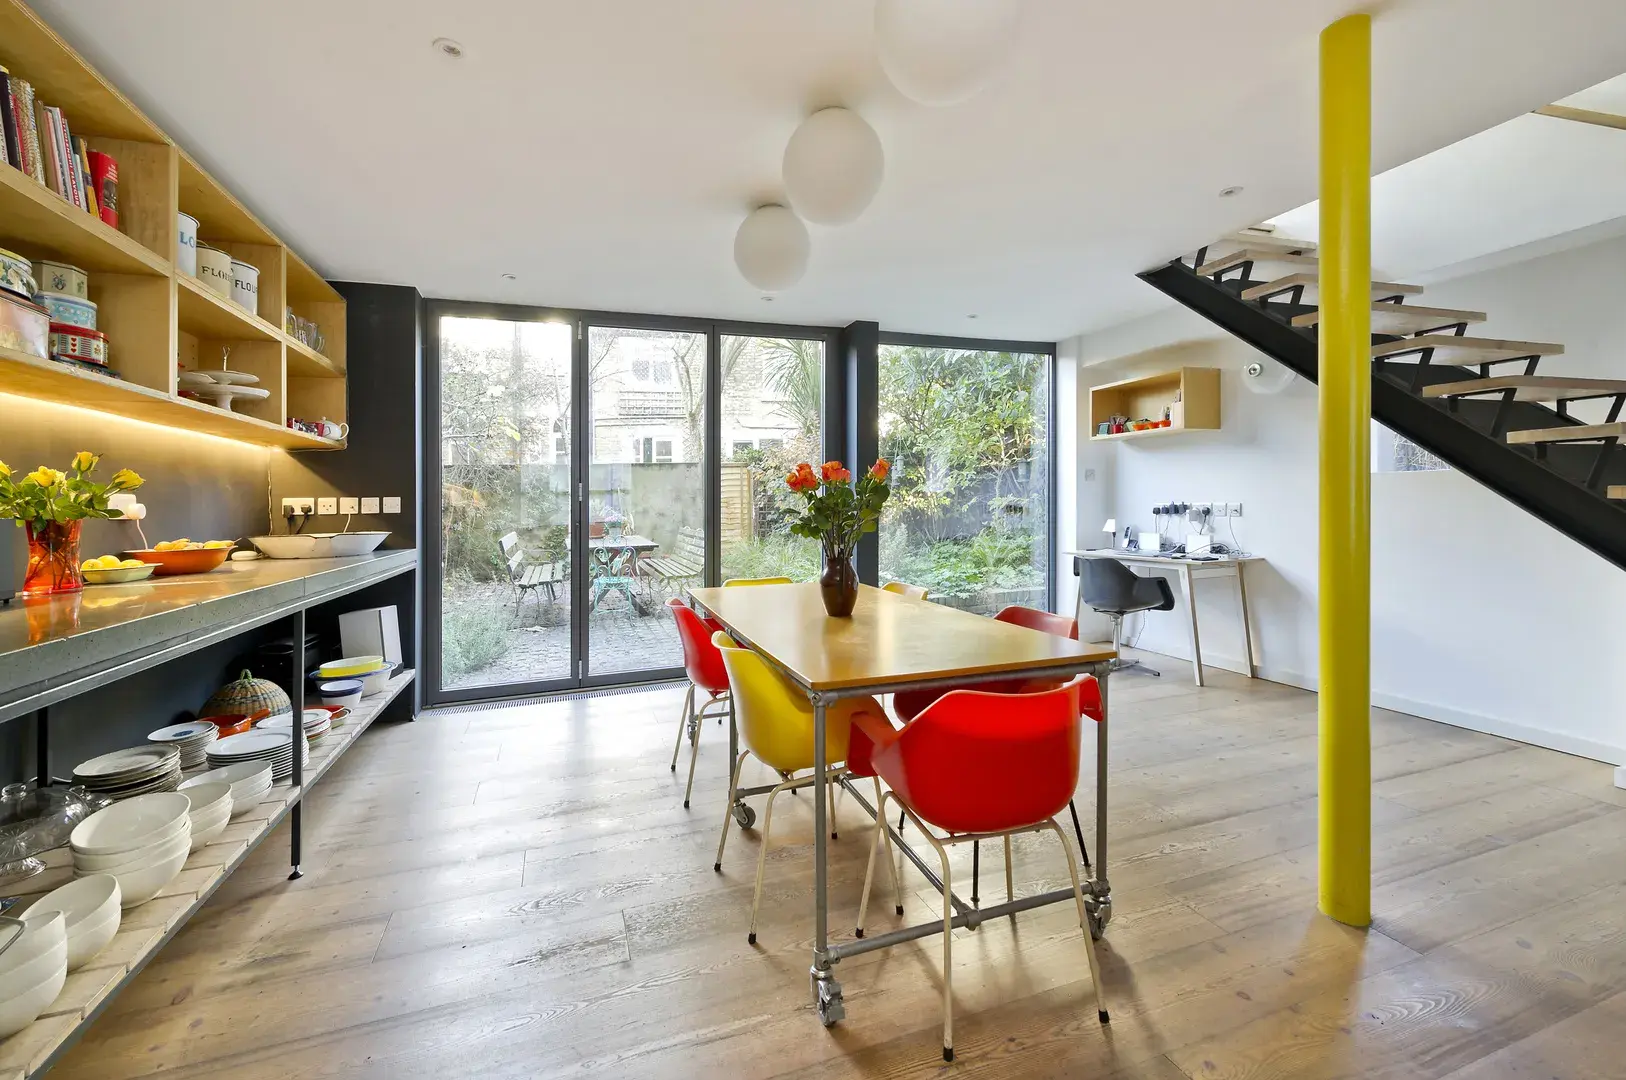 Hugo Road, holiday home in London